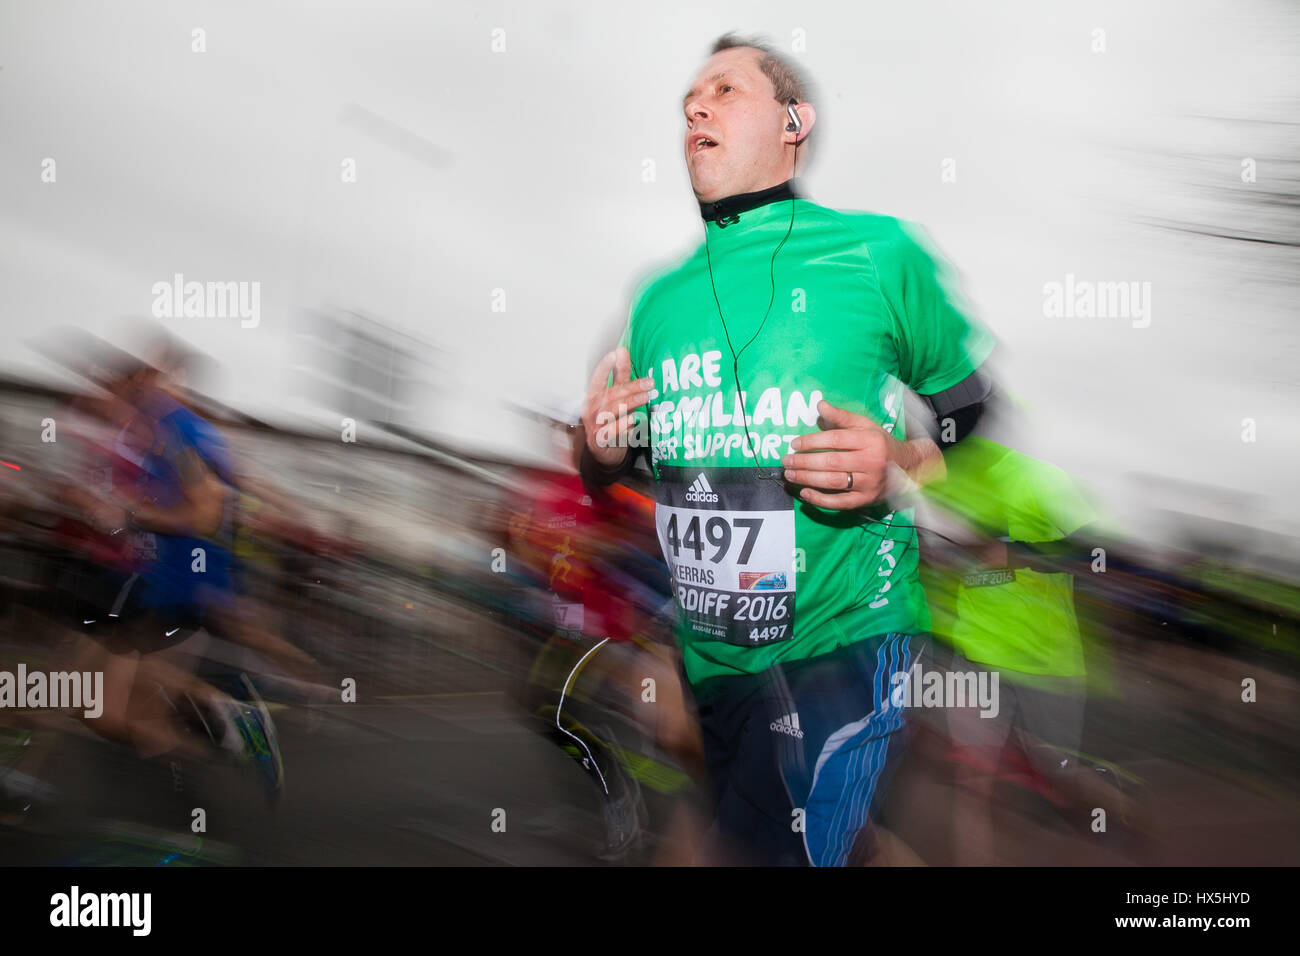 People take part in The World Half Marathon, Cardiff, UK, 26th March 2016 Stock Photo